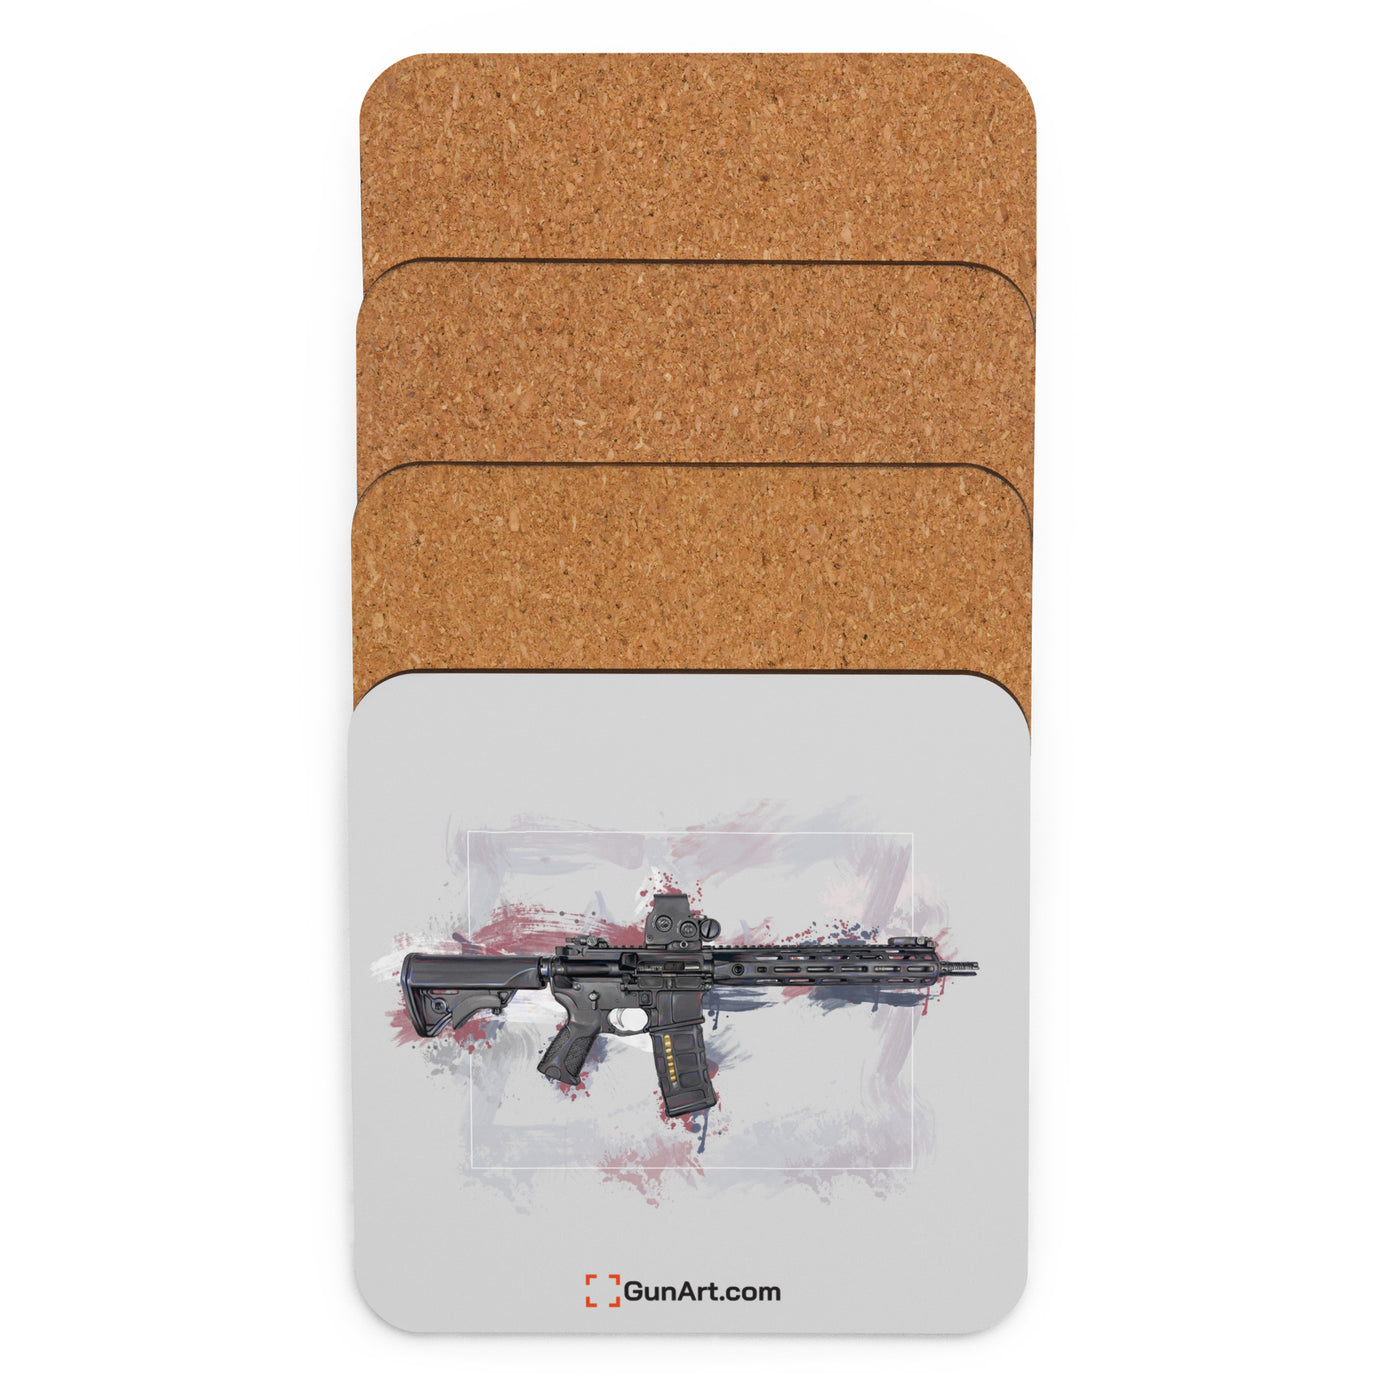 Defending Freedom - Wyoming - AR-15 State Cork-back Coaster - White State